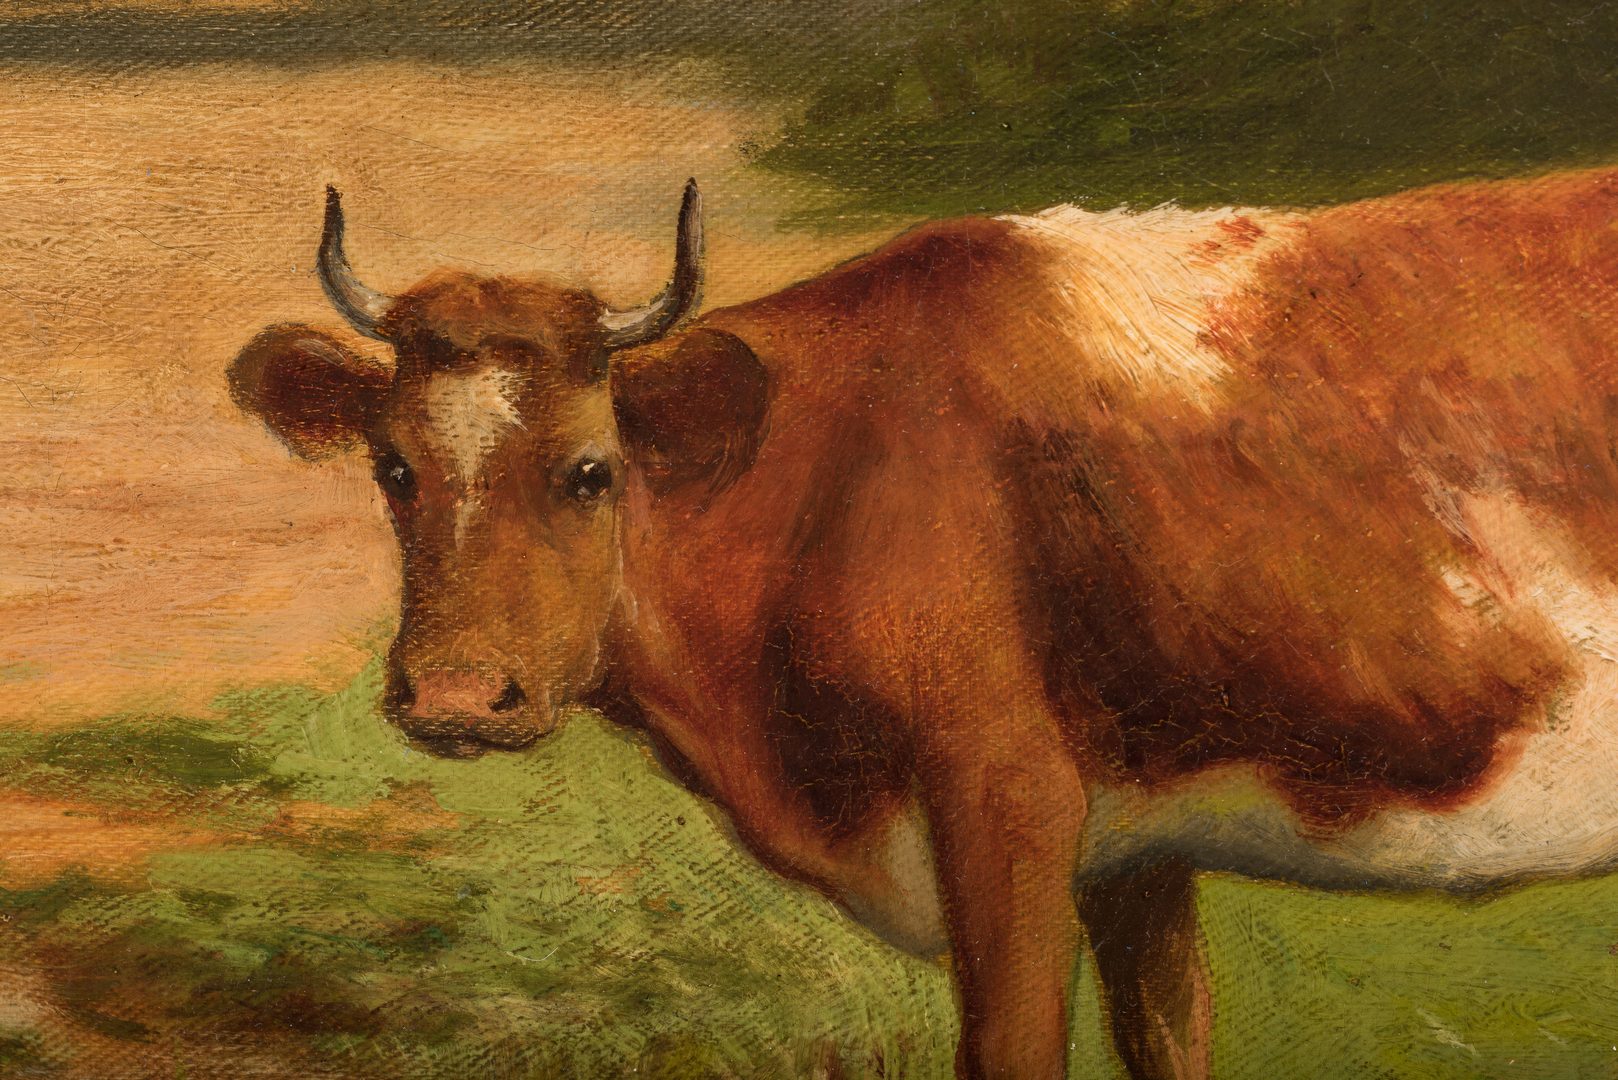 Lot 111: Robert Atkinson Fox, O/C, Cows on Country Road